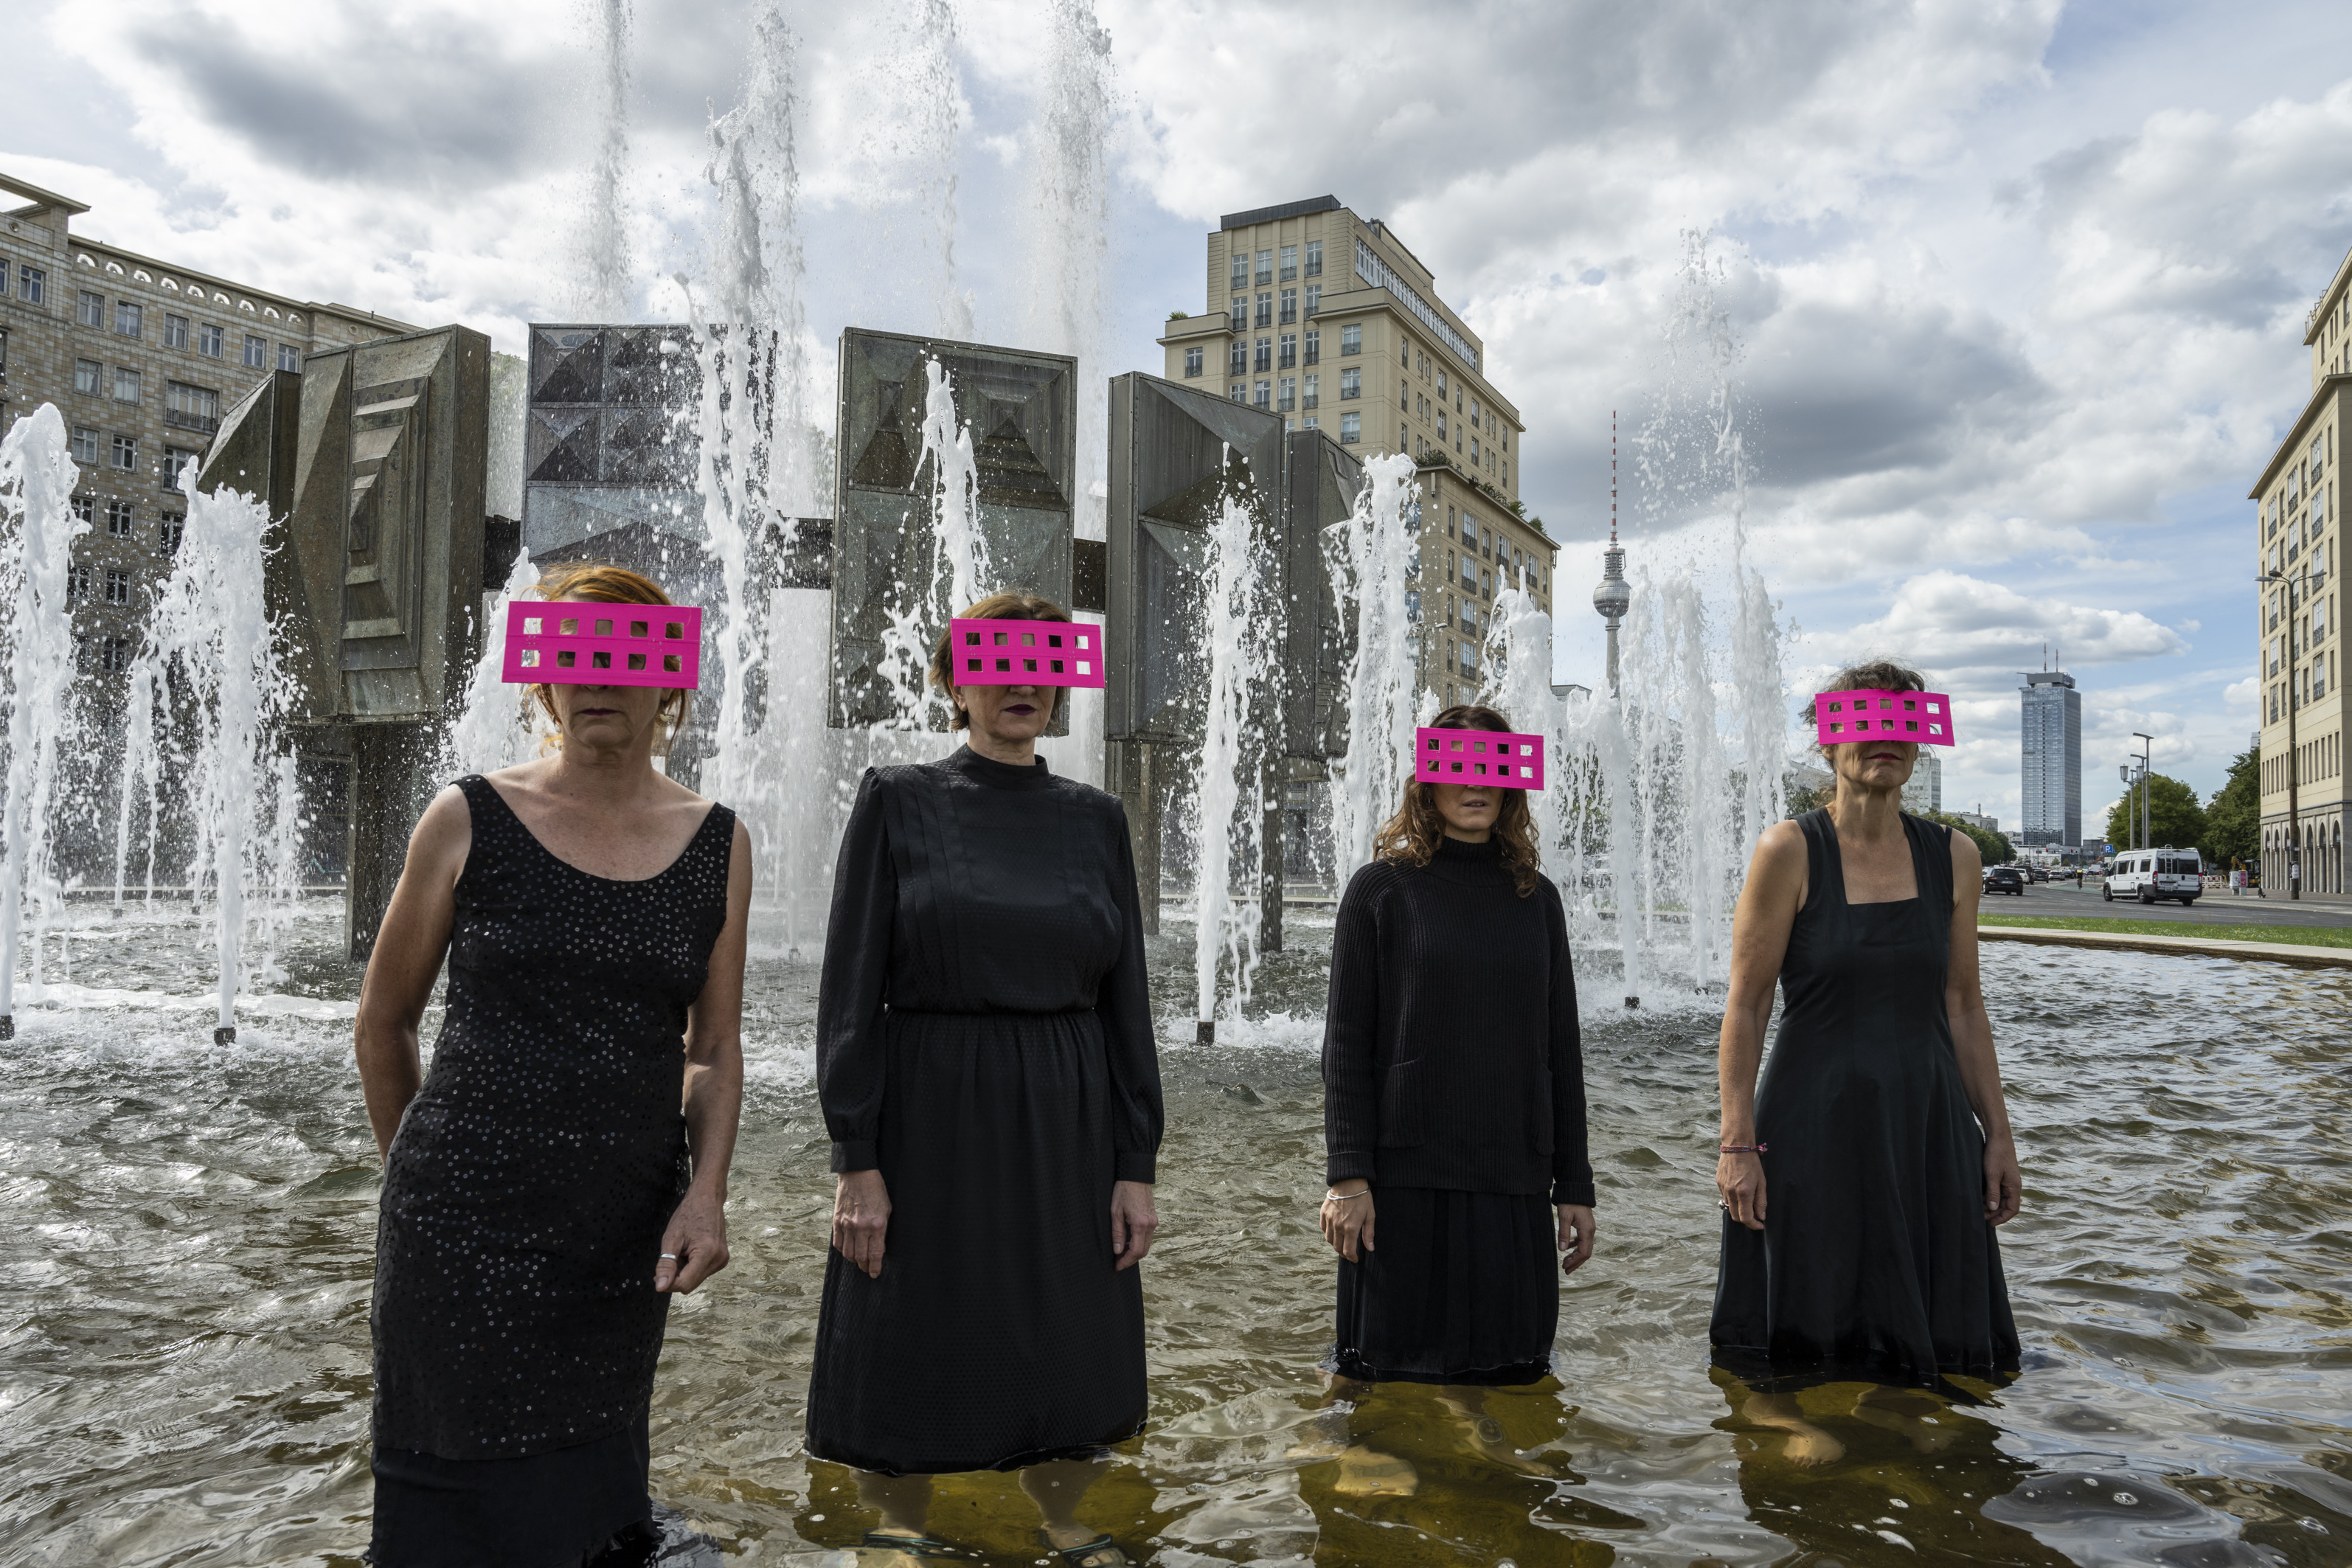 Four women stand in a fountain, dressed in black . They wear pink bars in front of their eyes, which are perforated.